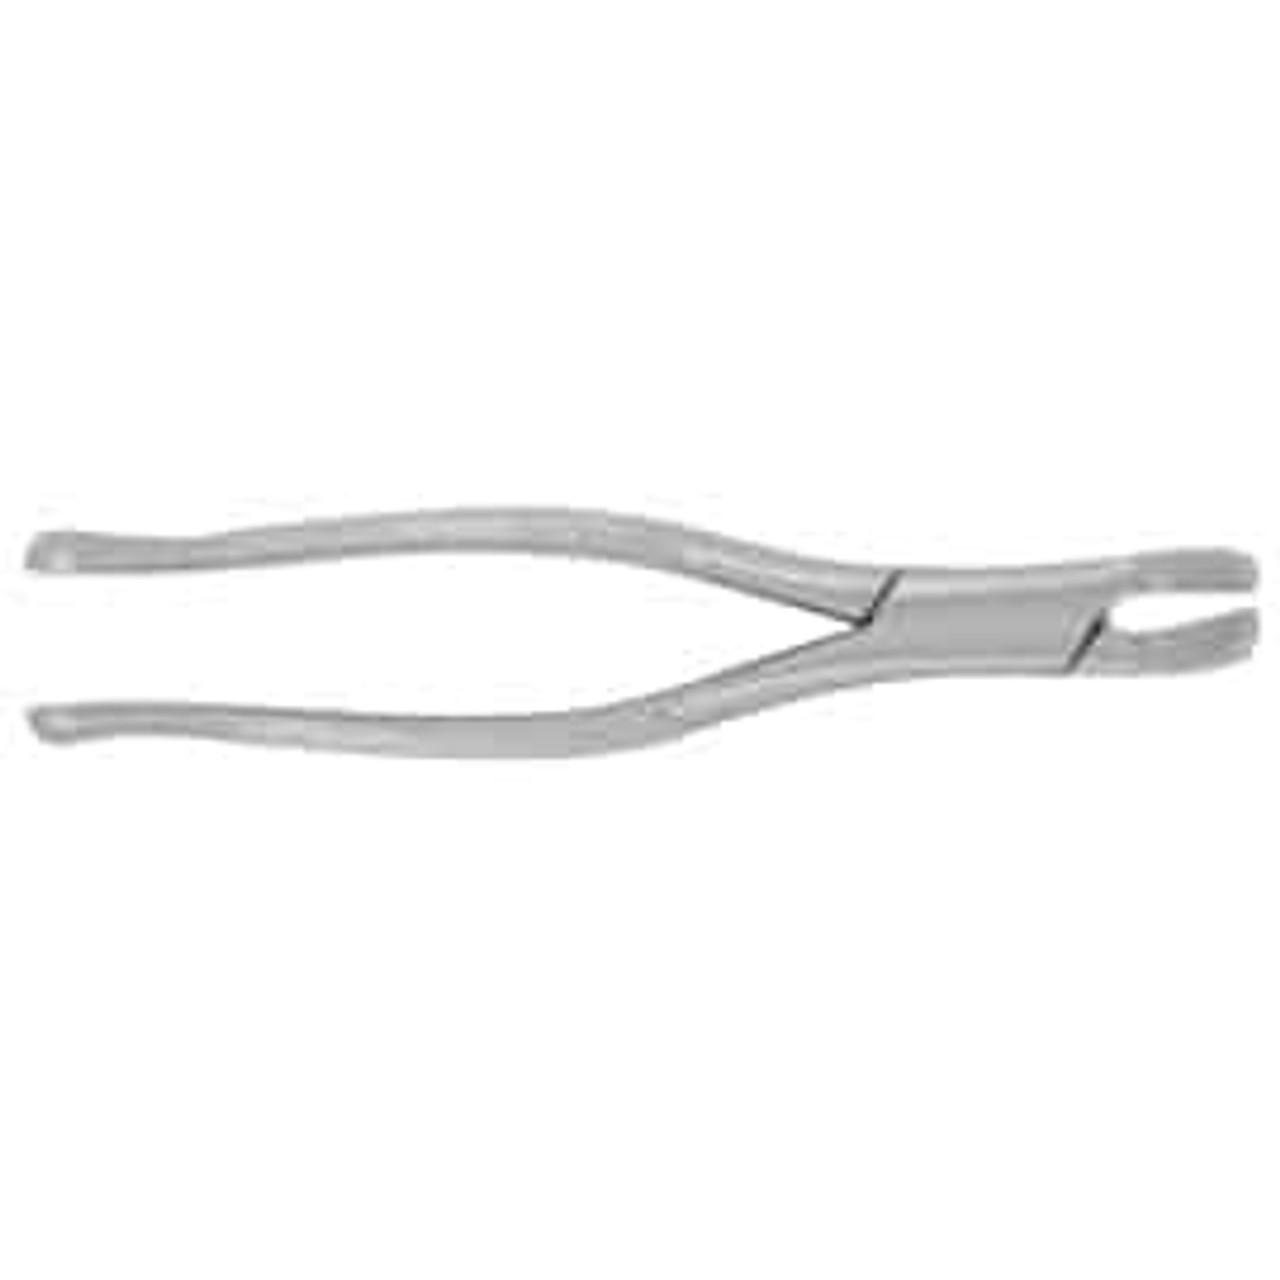 J & J Instruments - EXTRACTING FORCEPS #6